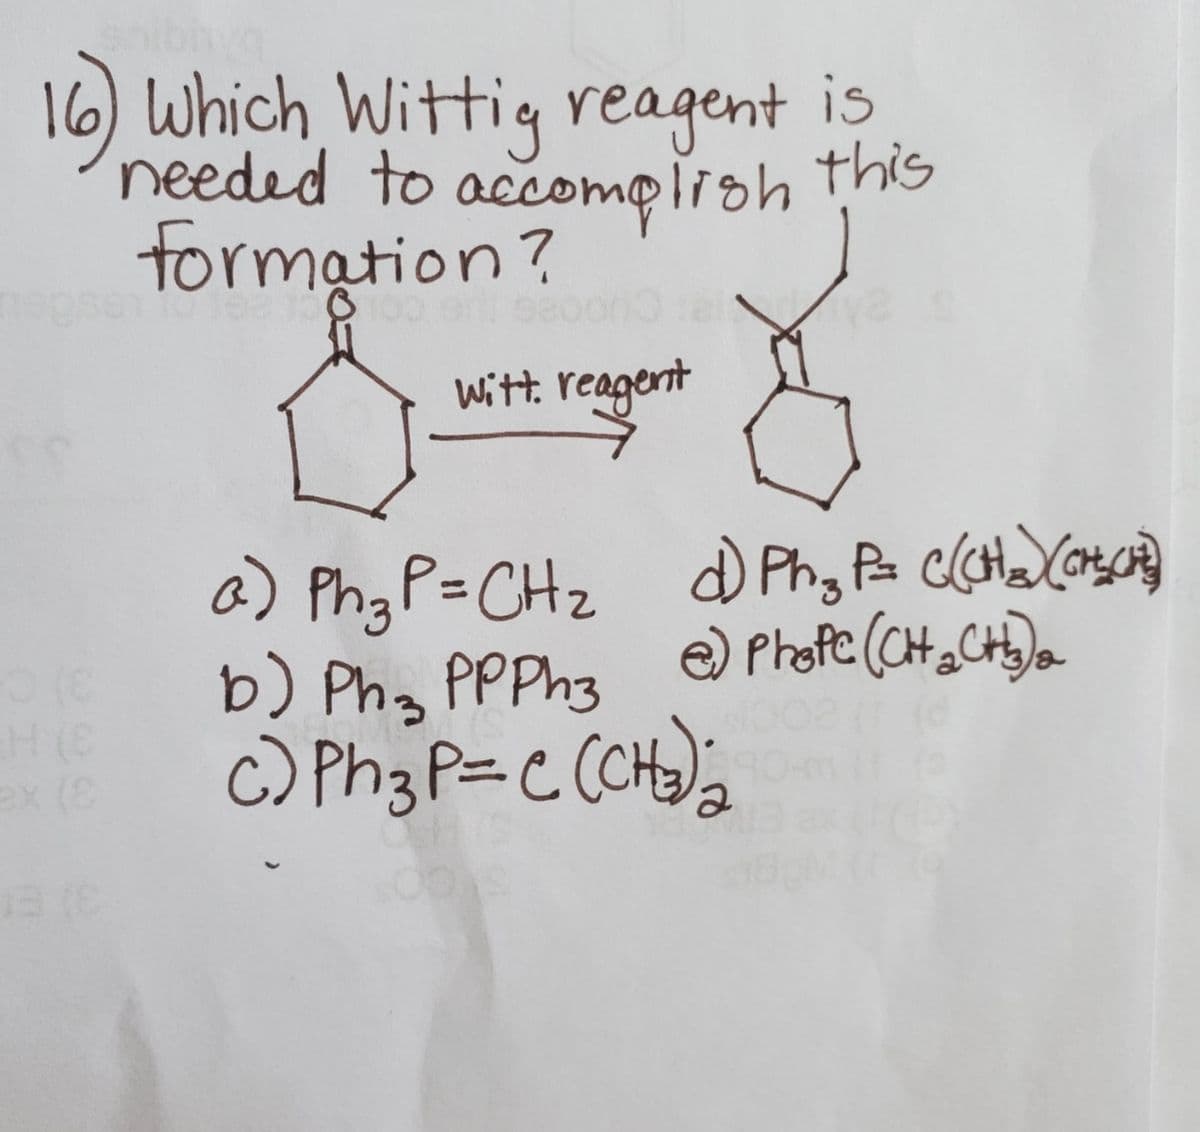 16) Which Wittig reagent is
needed to this
accomplioh
formation?
Witt. reagent
a) PhgP=CHz
b) Ph, PPPh3
c) Ph3 P=C (CH);
e) Phofe (CH , CH)a
ex (
